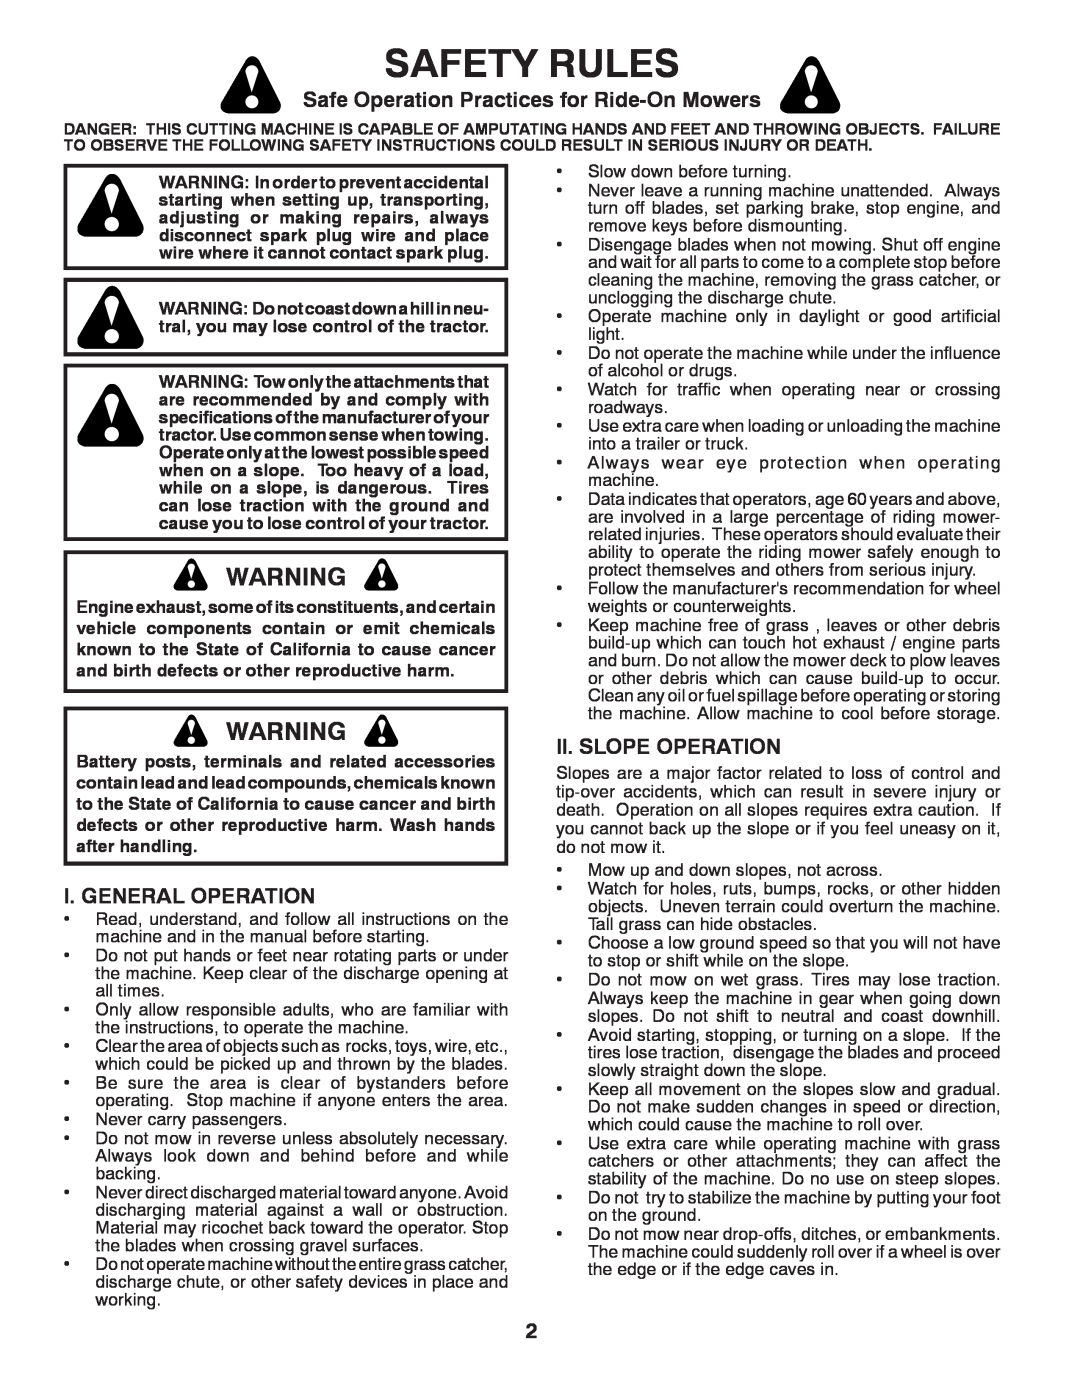 Poulan 532 43 88-98 Safety Rules, Safe Operation Practices for Ride-On Mowers, I. General Operation, Ii. Slope Operation 